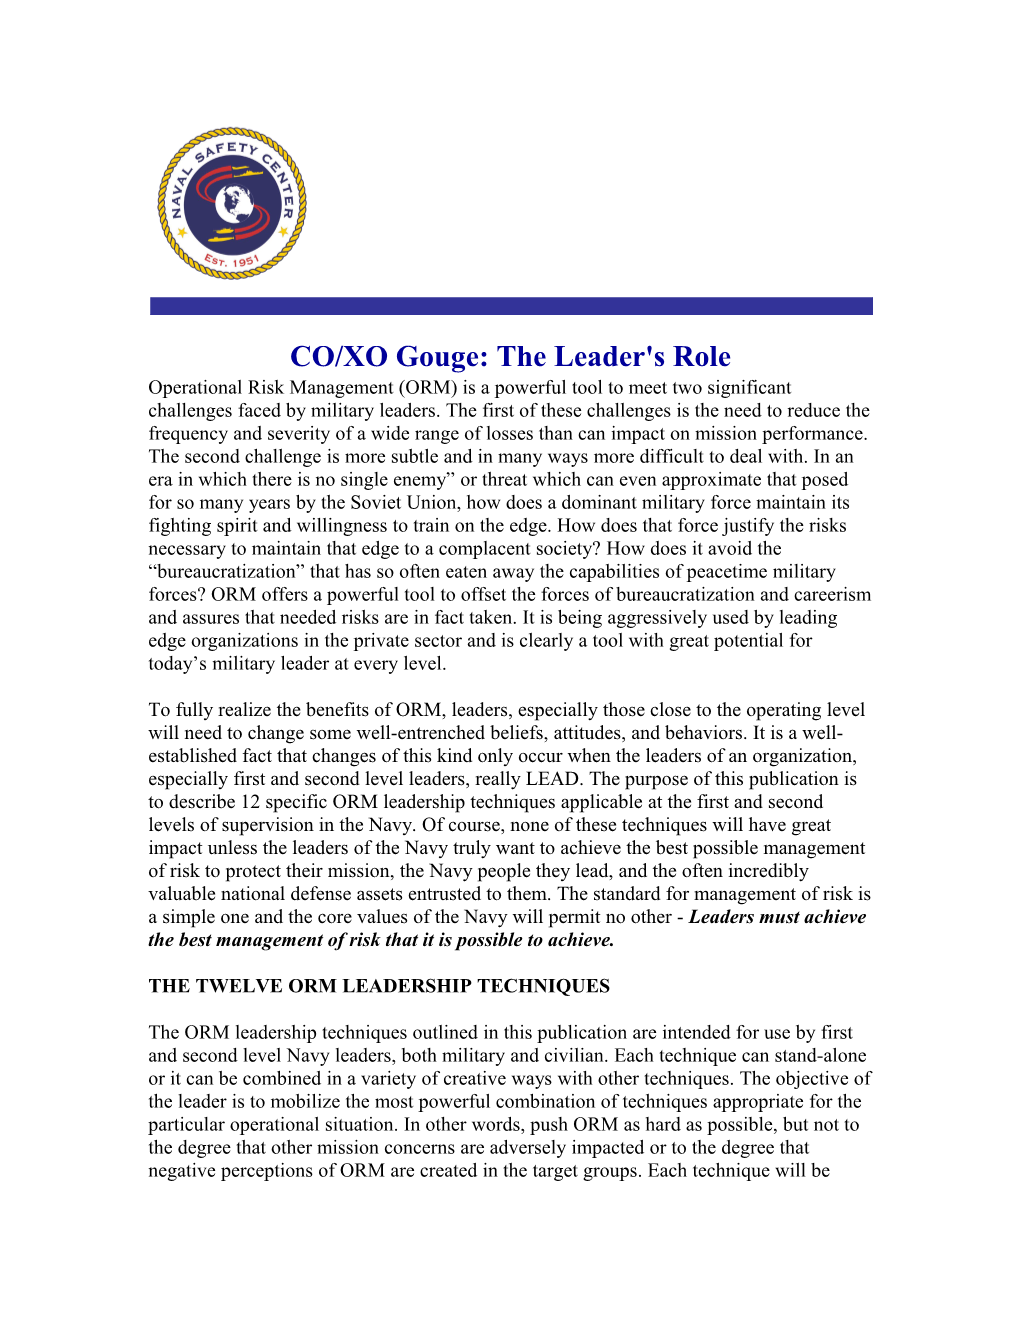 CO/XO Gouge: the Leader's Role